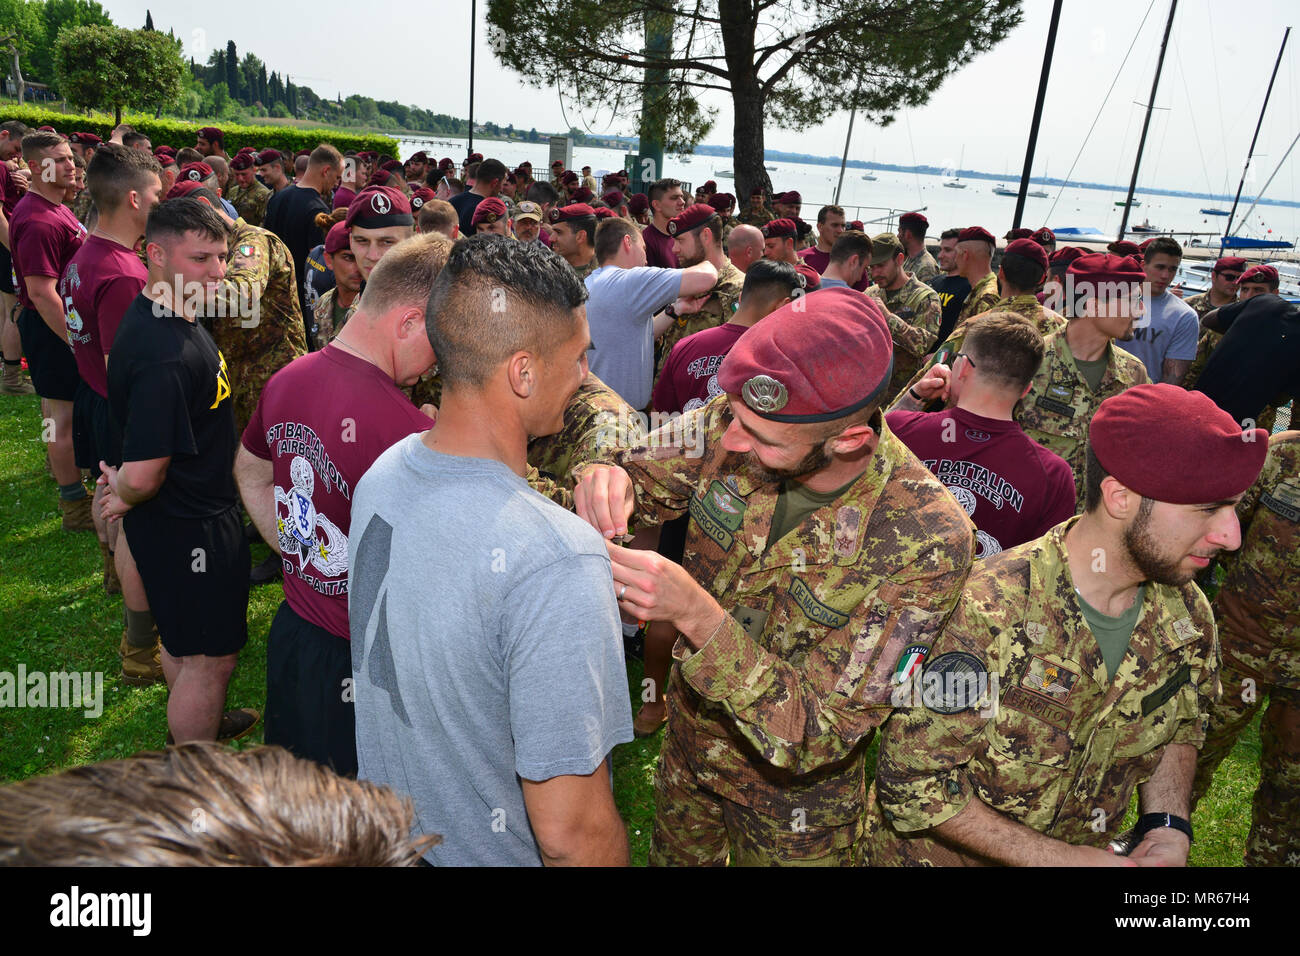 U.S. Army Paratroopers assigned to 1st Battalion, 503rd Infantry Regiment, 173rd Airborne Brigade, Italian Army Paratroopers from the 4th Regimento Paracadutisti Alpini and the Brigata Folgore exchange airborne wings after a water jump into Lake Garda near Pacengo, Italy, May 18, 2017. The event highlighted combined NATO airborne operations between the brigade and its host nation allies. The 173rd Airborne Brigade is the U.S. Army Contingency Response Force in Europe, capable of projecting ready forces anywhere in the U.S. European, Africa or Central Commands' areas of responsibility within 18 Stock Photo